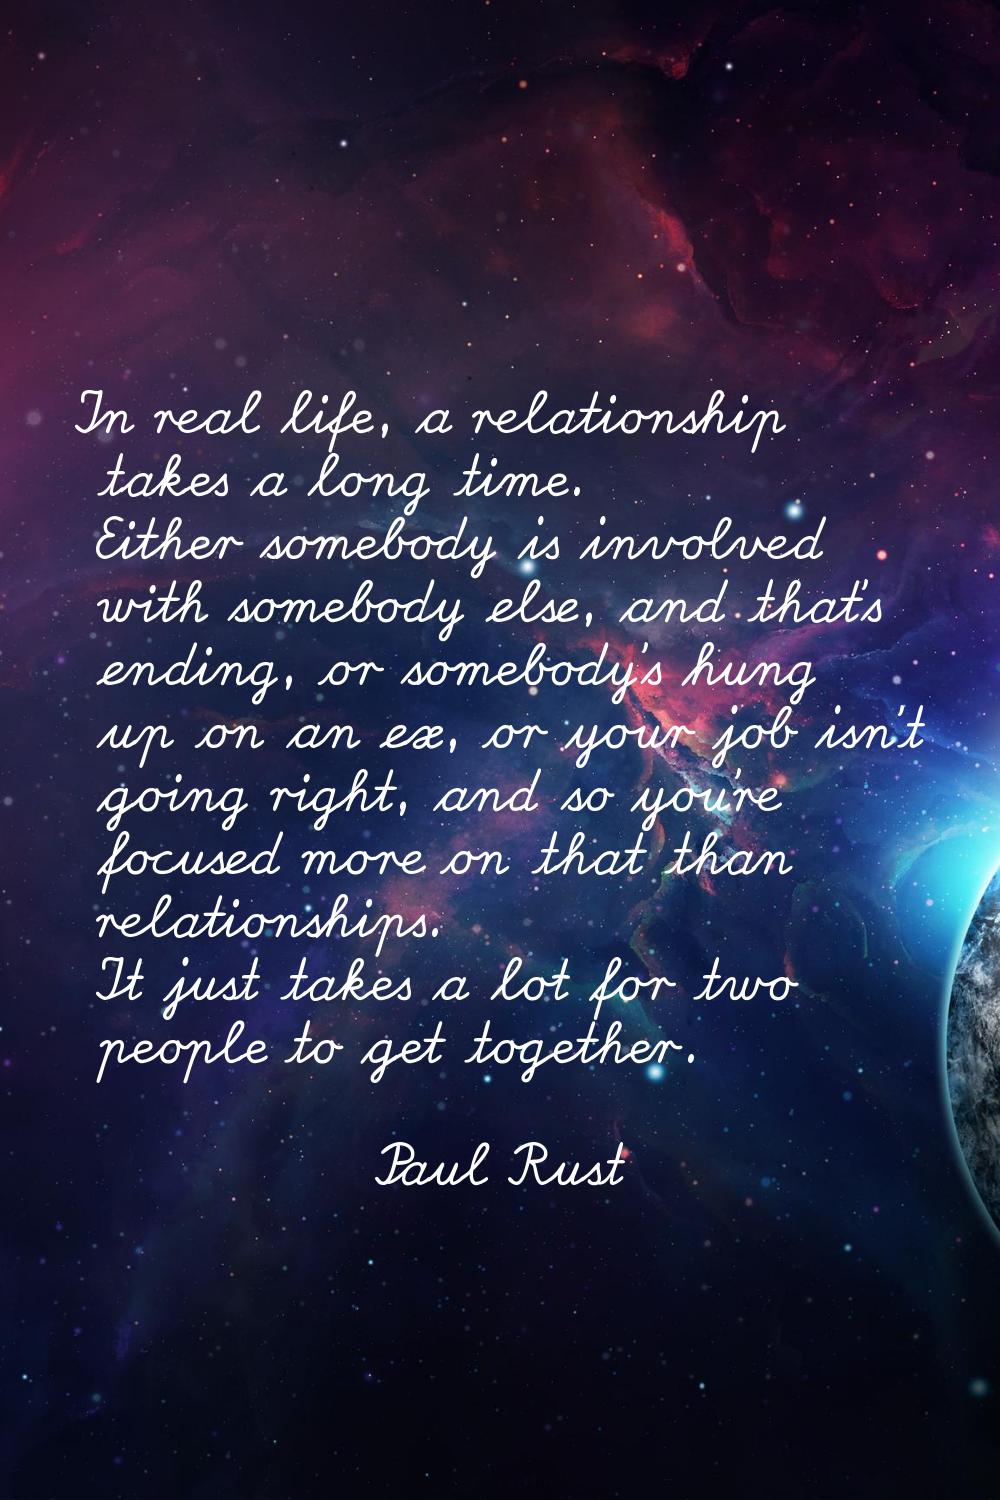 In real life, a relationship takes a long time. Either somebody is involved with somebody else, and